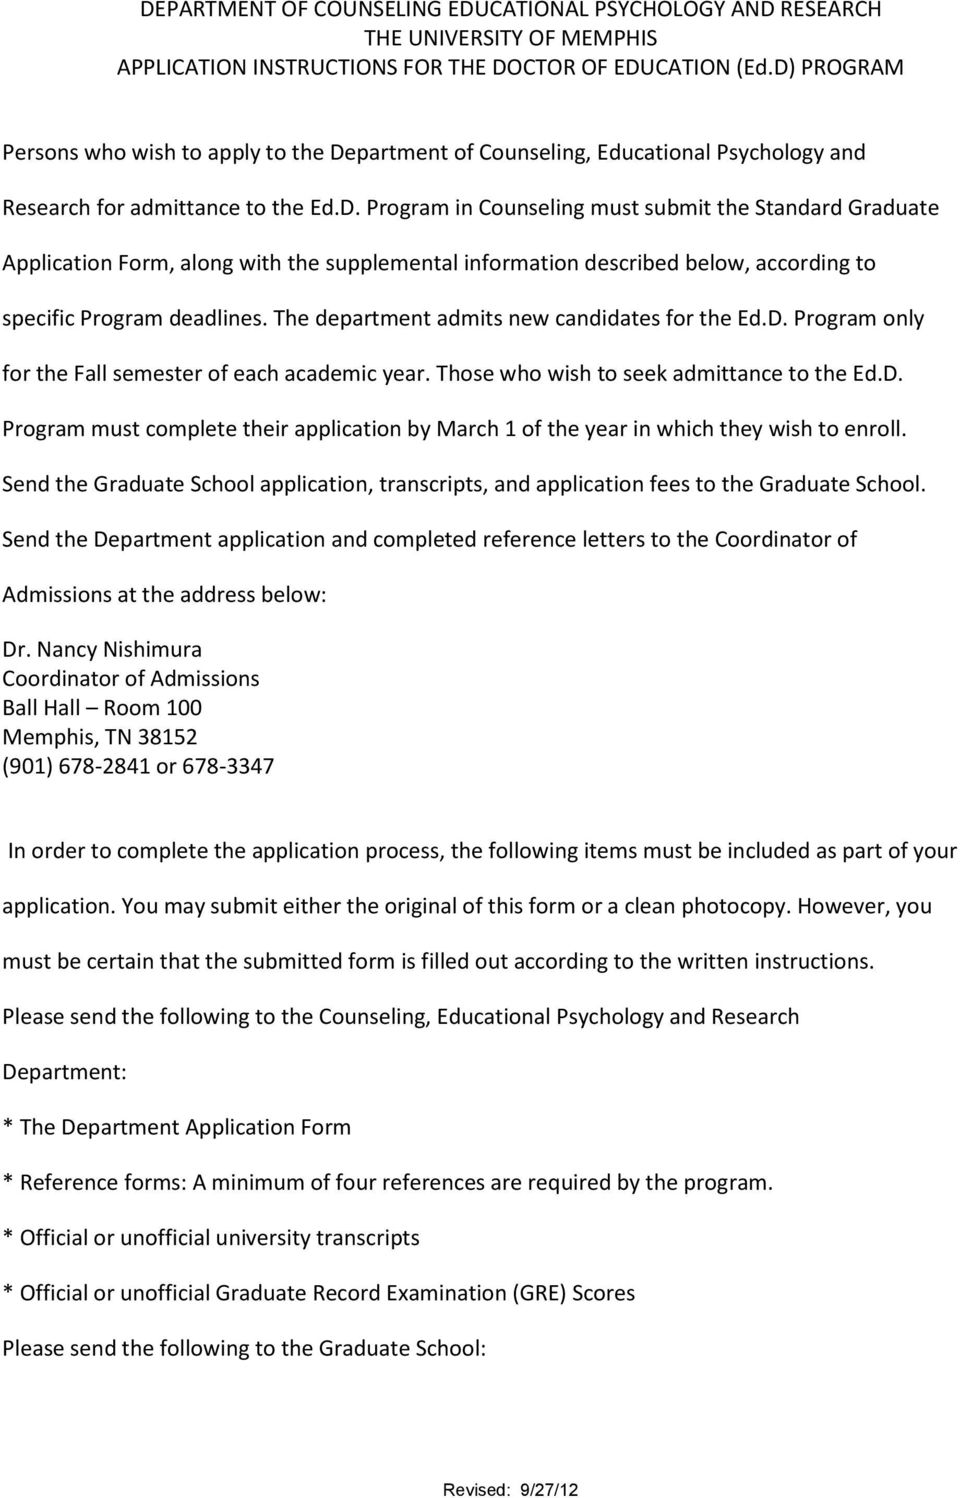 The department admits new candidates for the Ed.D. Program only for the Fall semester of each academic year. Those who wish to seek admittance to the Ed.D. Program must complete their application by March 1 of the year in which they wish to enroll.